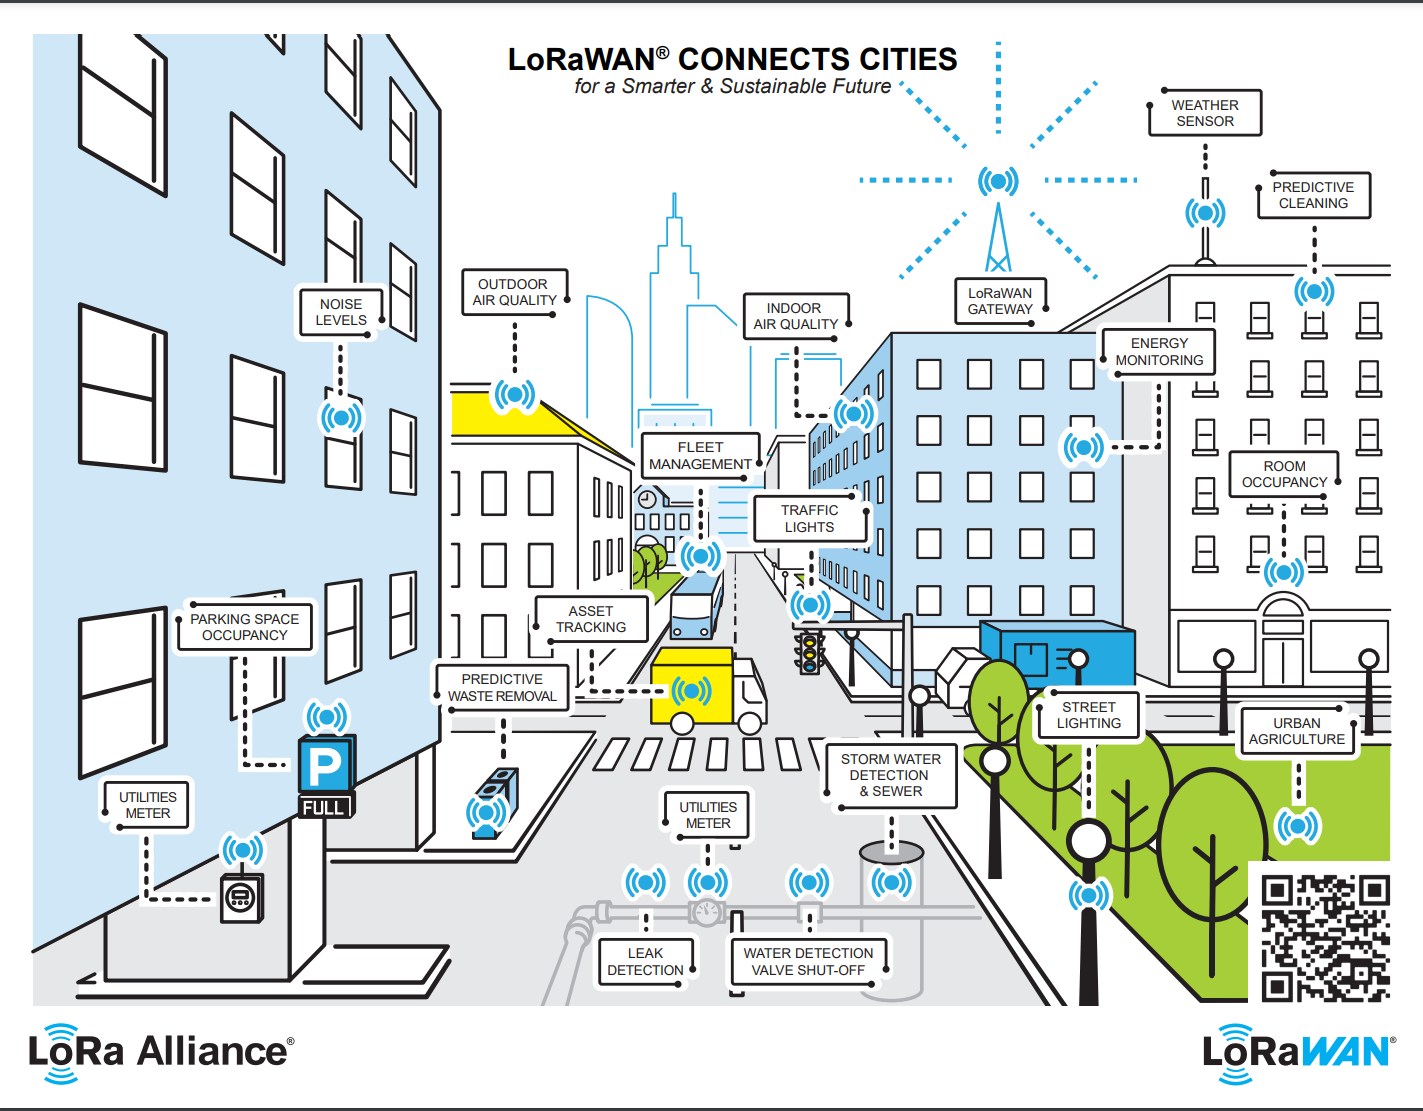 LoRaWAN Connects Cities